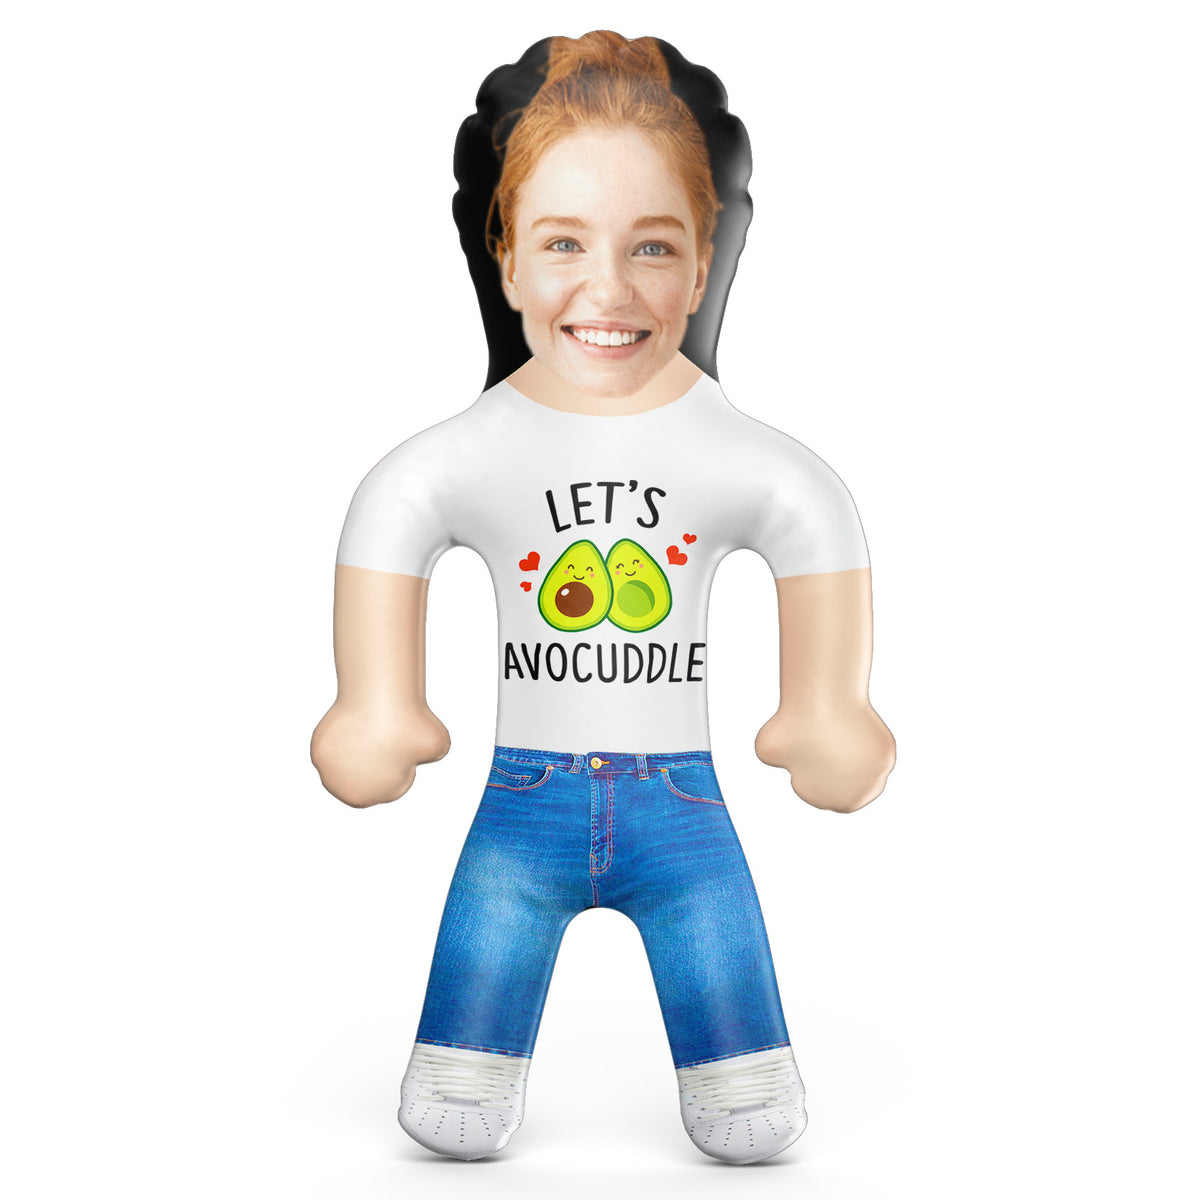 Avocuddle Me Inflatable Doll - Avocuddle Blow Up Doll